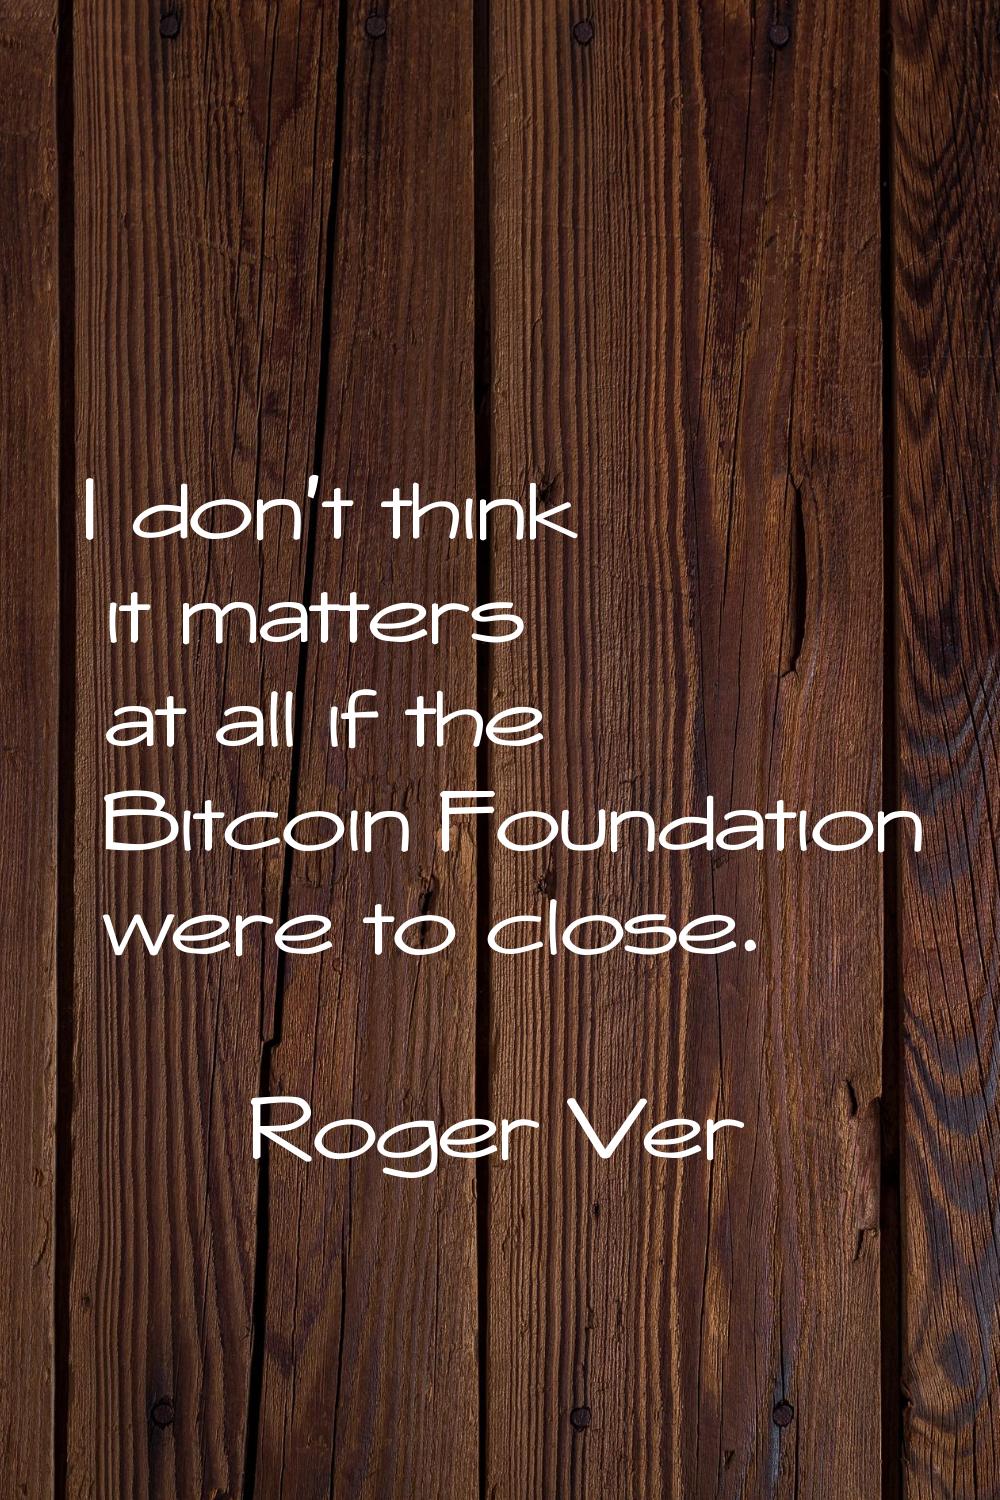 I don't think it matters at all if the Bitcoin Foundation were to close.